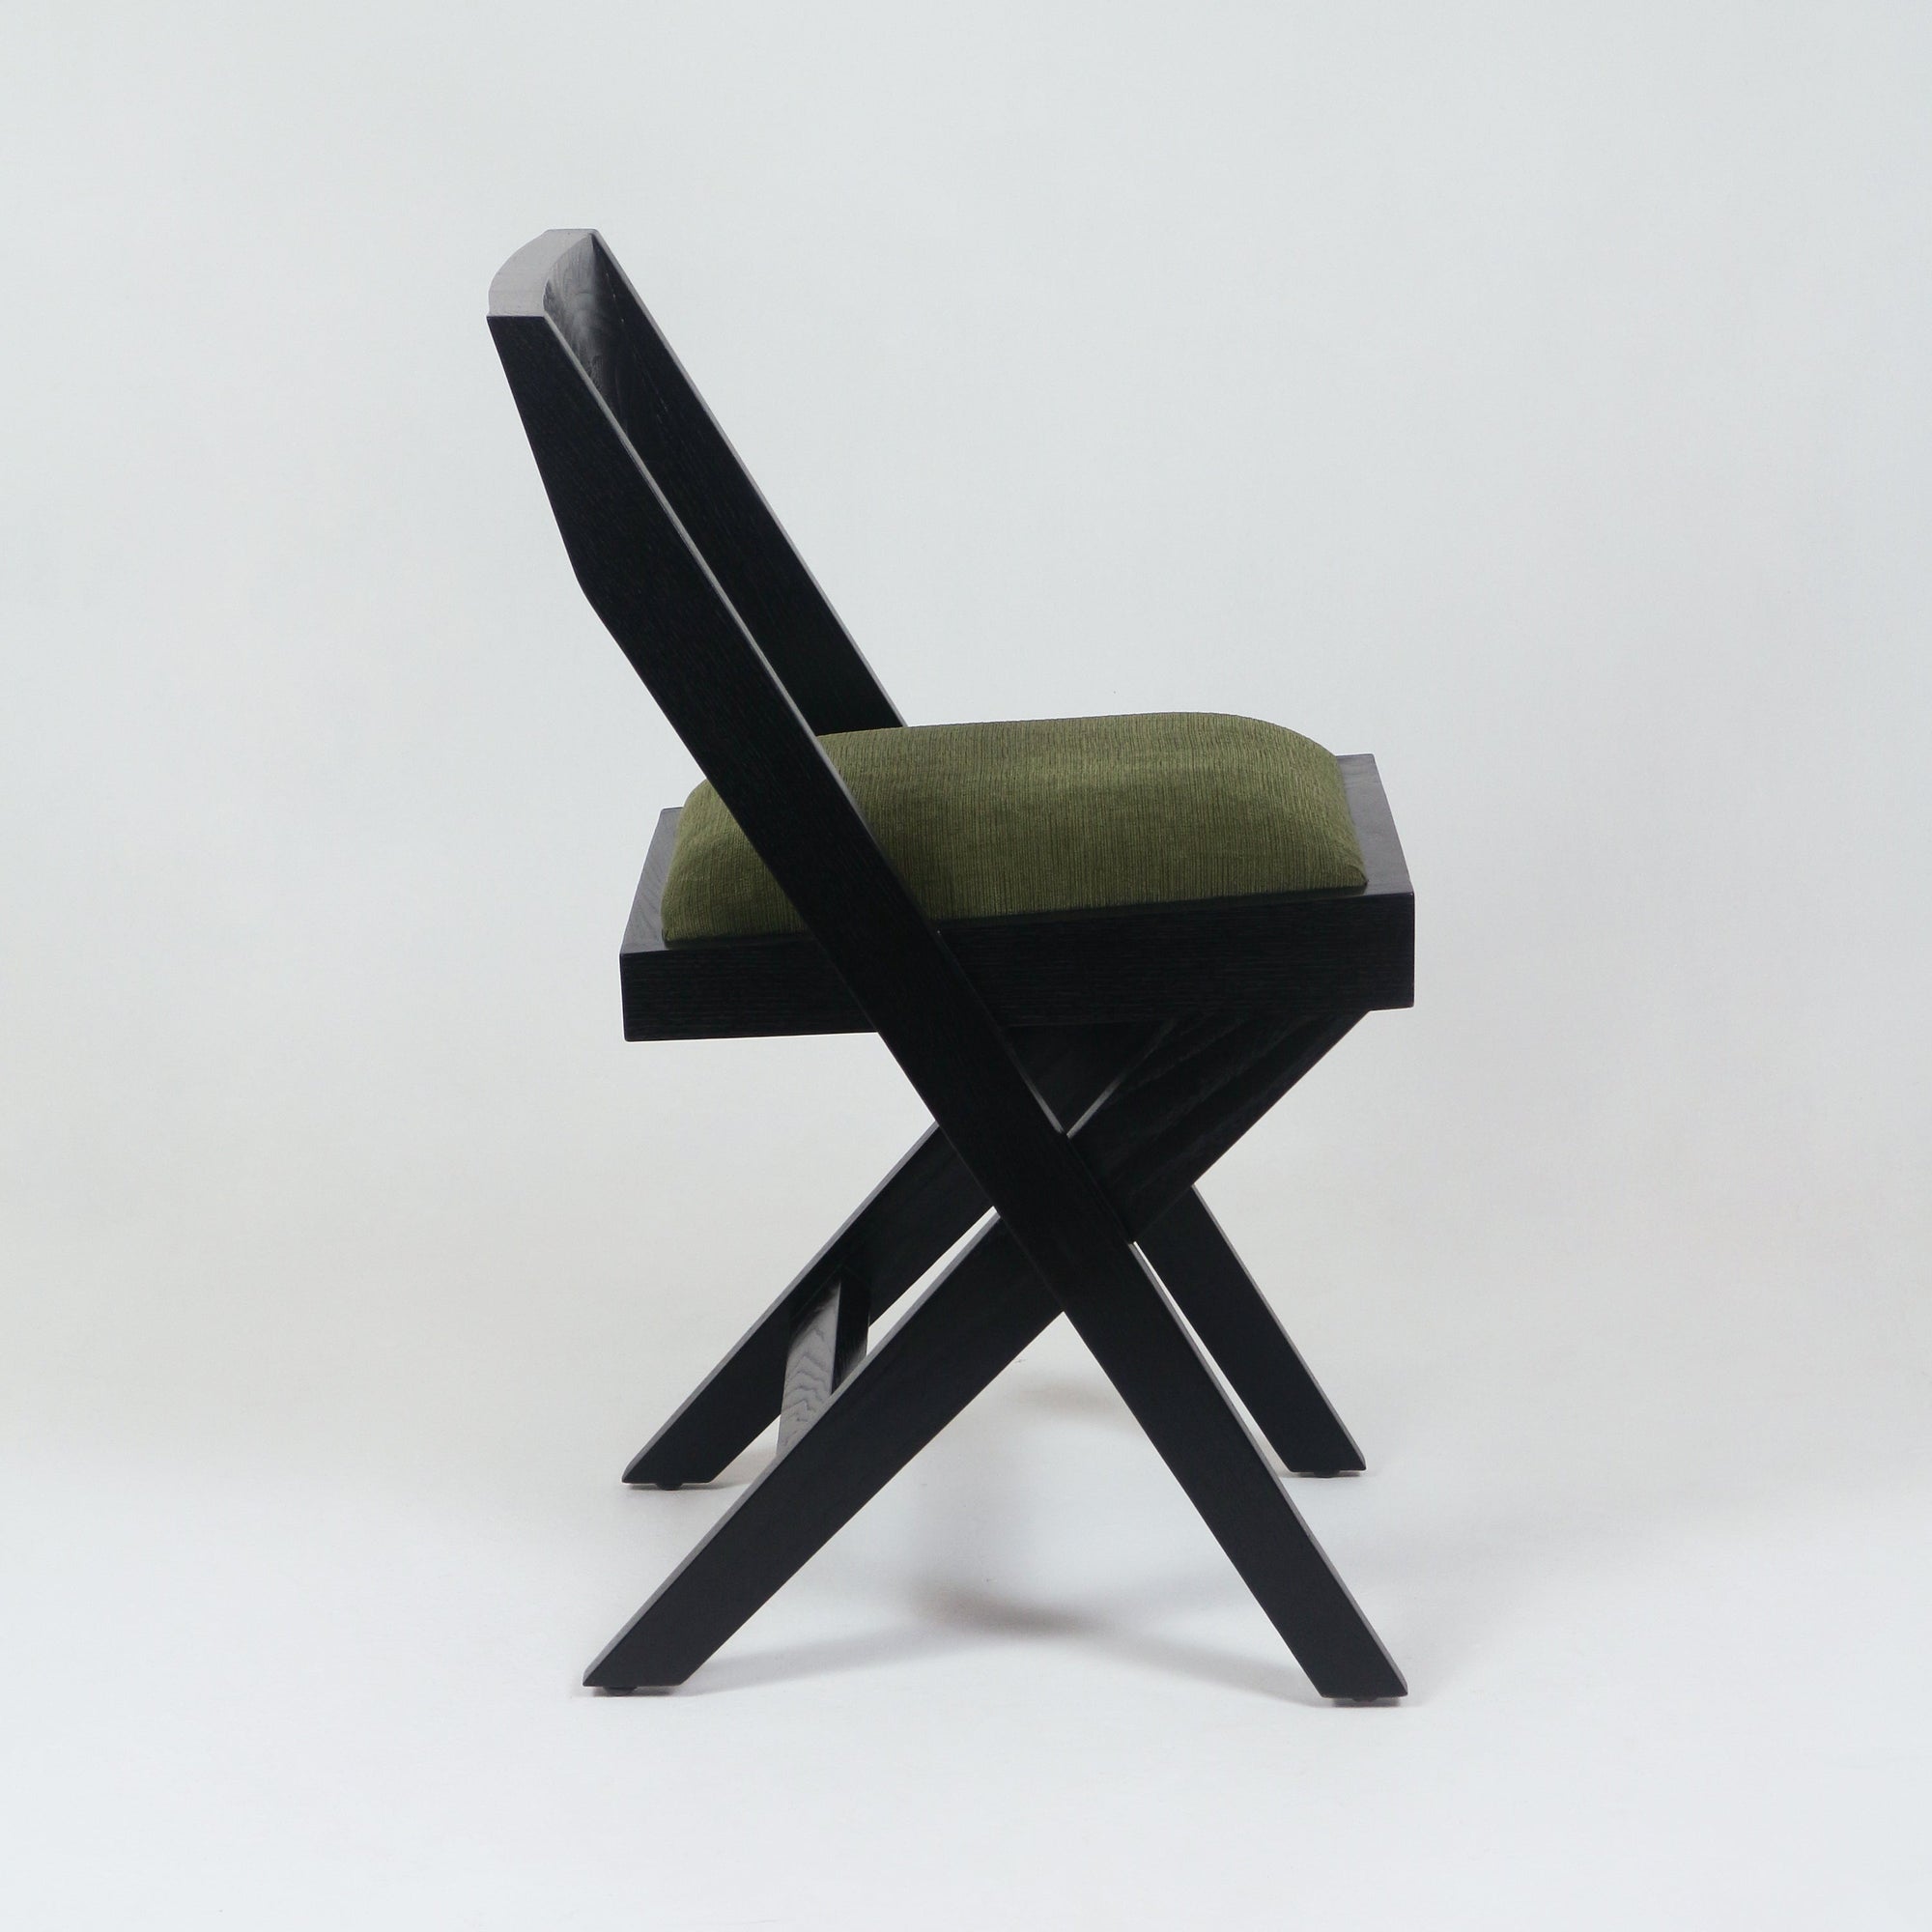 Solid Ash Jeanneret Inspired Library / Dining Chair - INTERIORTONIC